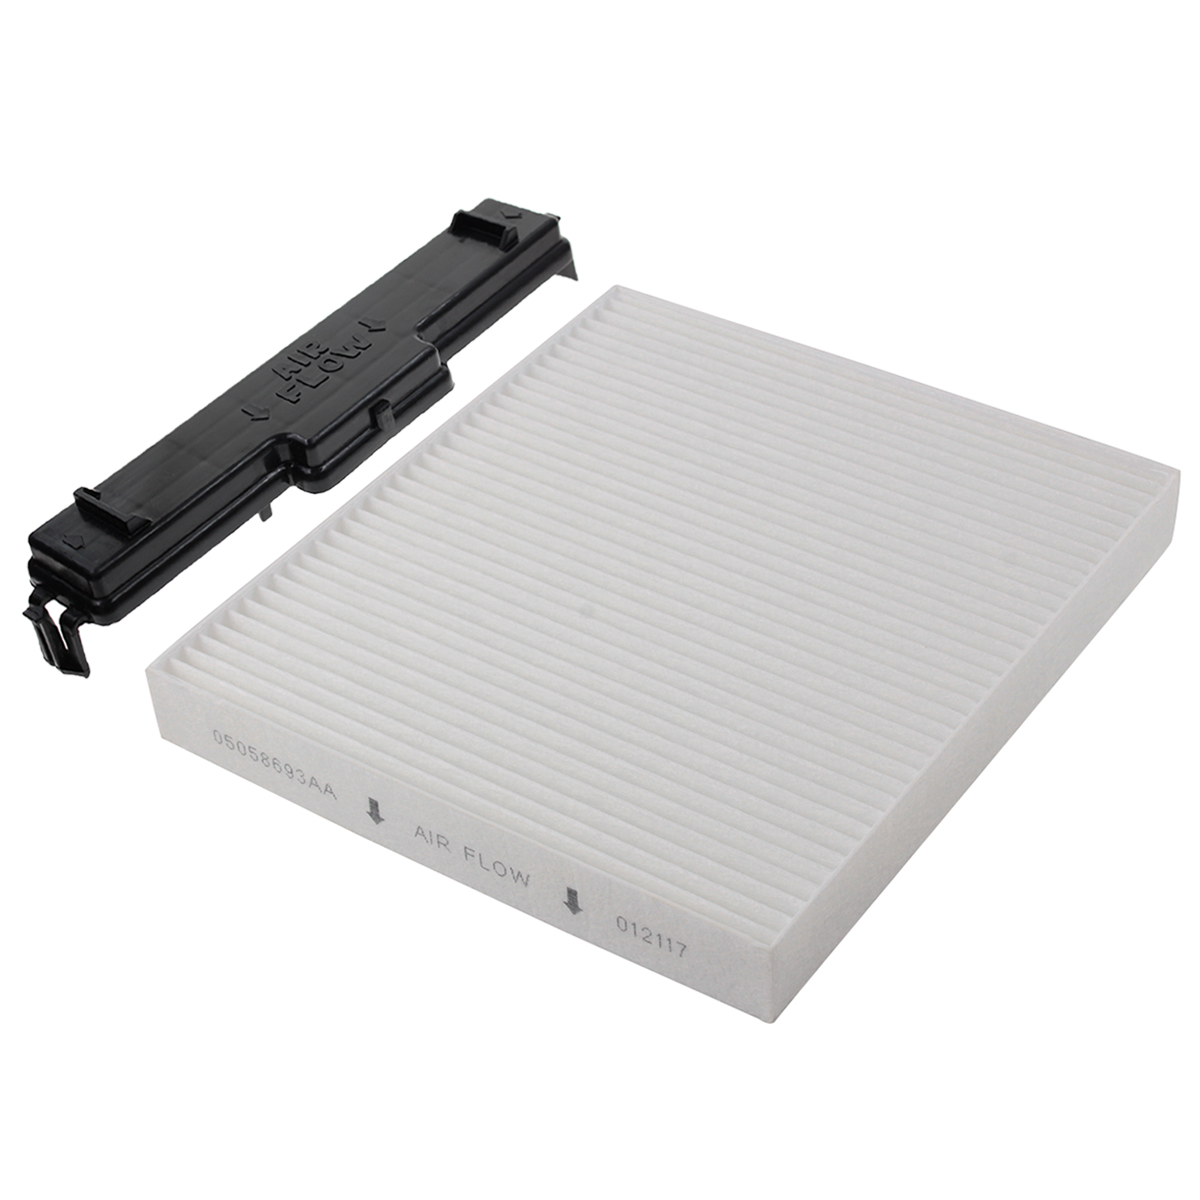 Cabin Air Filter Package Fits for 2010-2014 Dodge Avenger Mainstreet Express Lux | eBay 2014 Dodge Avenger Cabin Air Filter Replacement